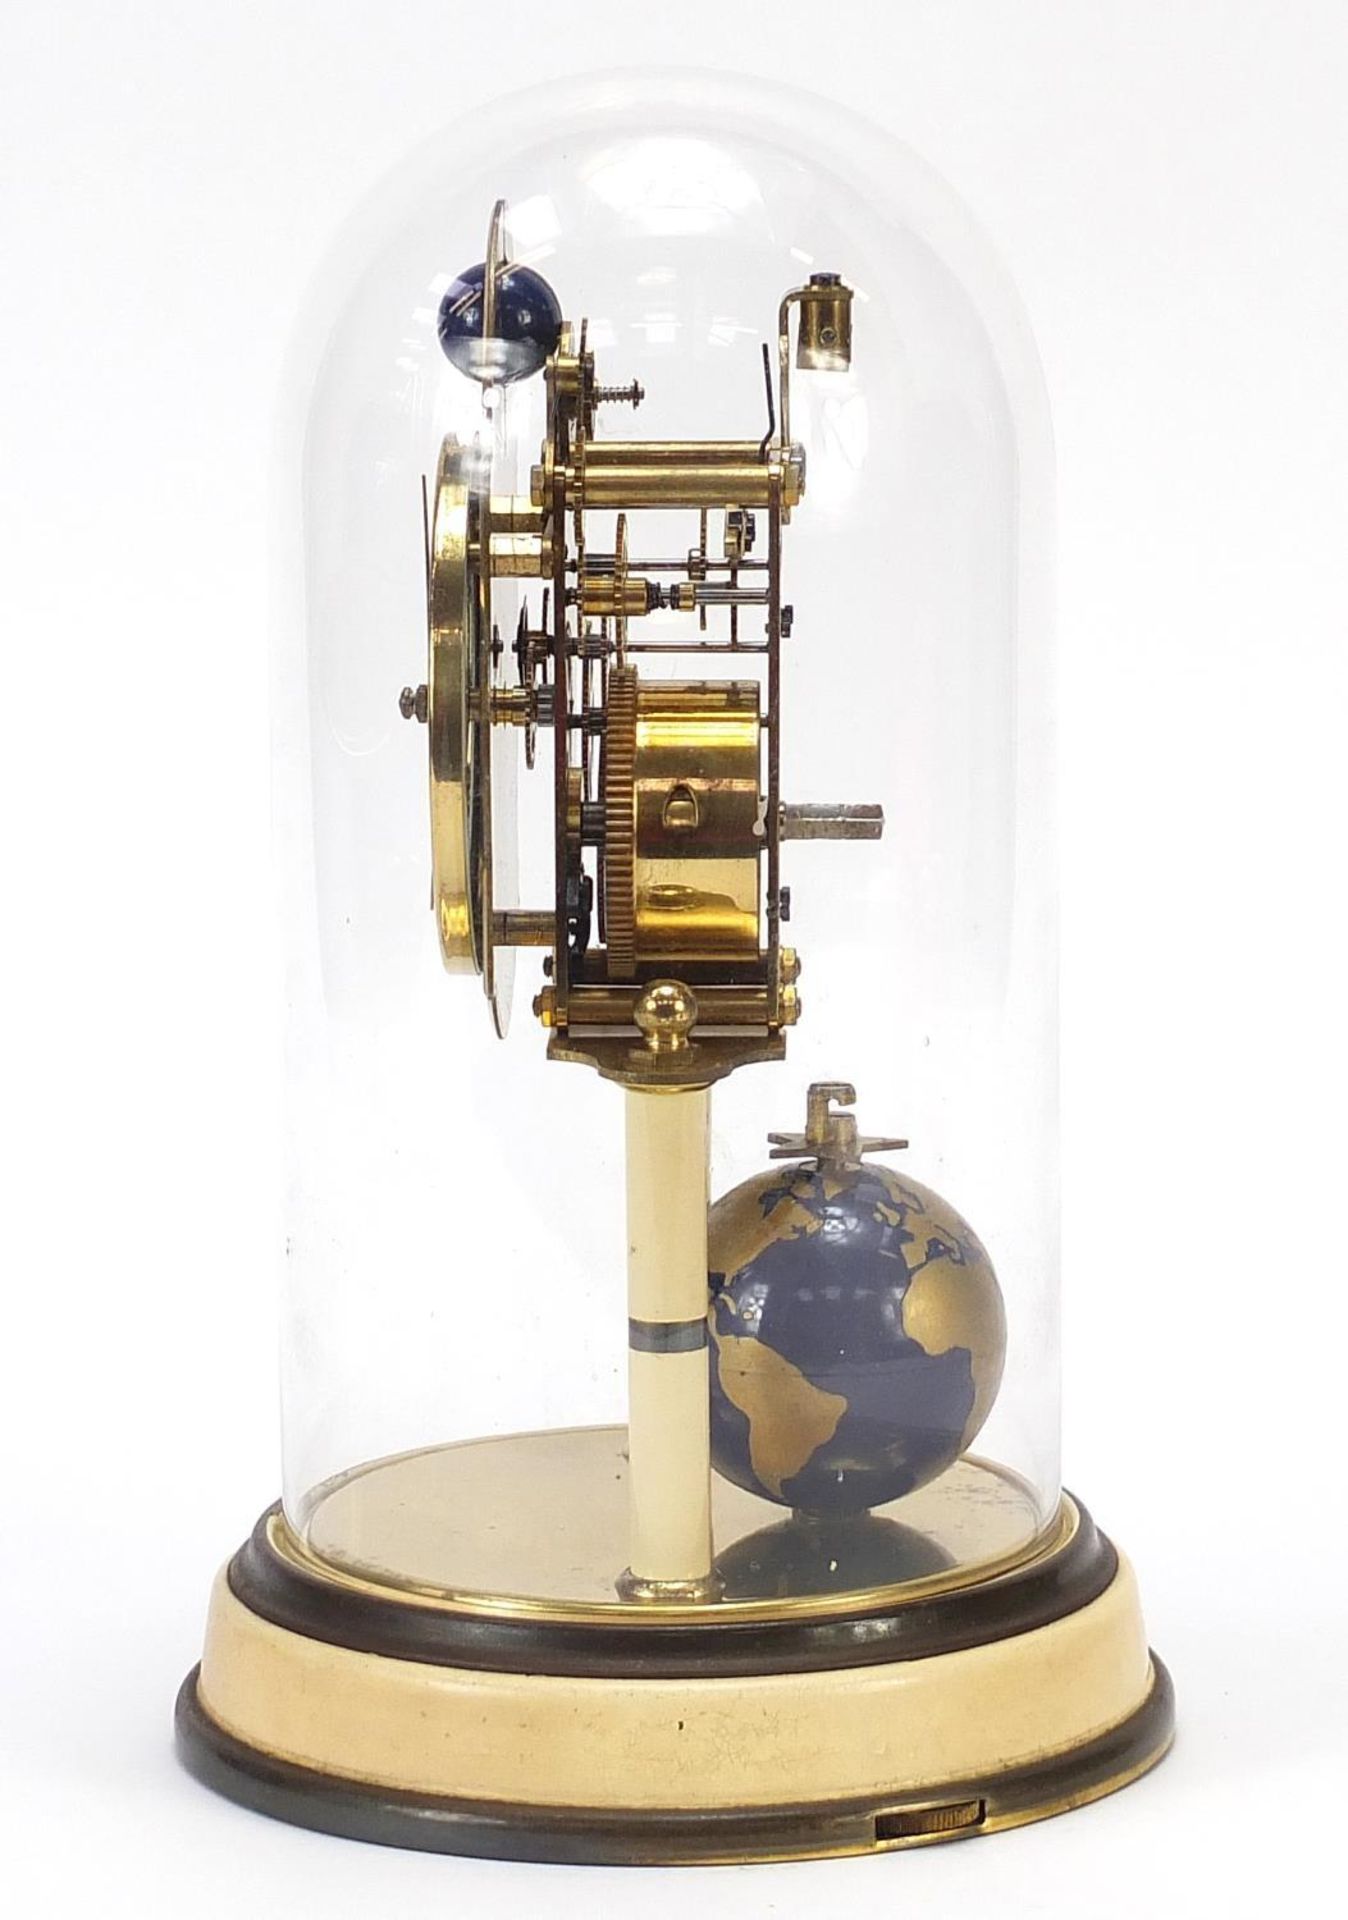 Kaiser four hundred day globe clock with glass dome, 26.5cm high - Image 2 of 5